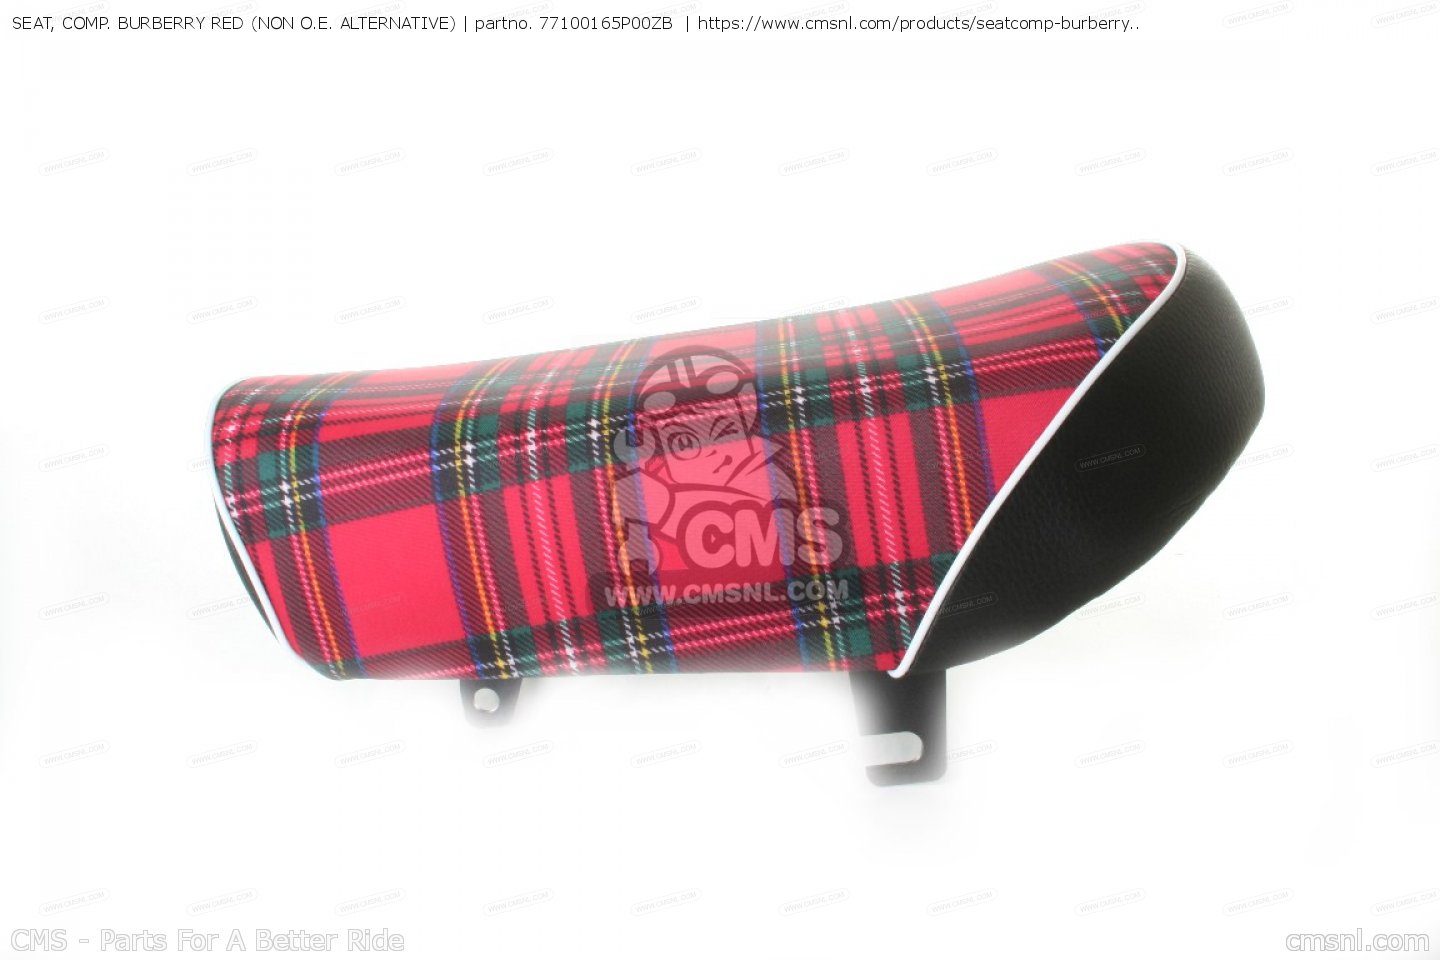 SEAT, COMP. BURBERRY RED for Z50J MONKEY 1989 (K) FINLAND - order at CMSNL